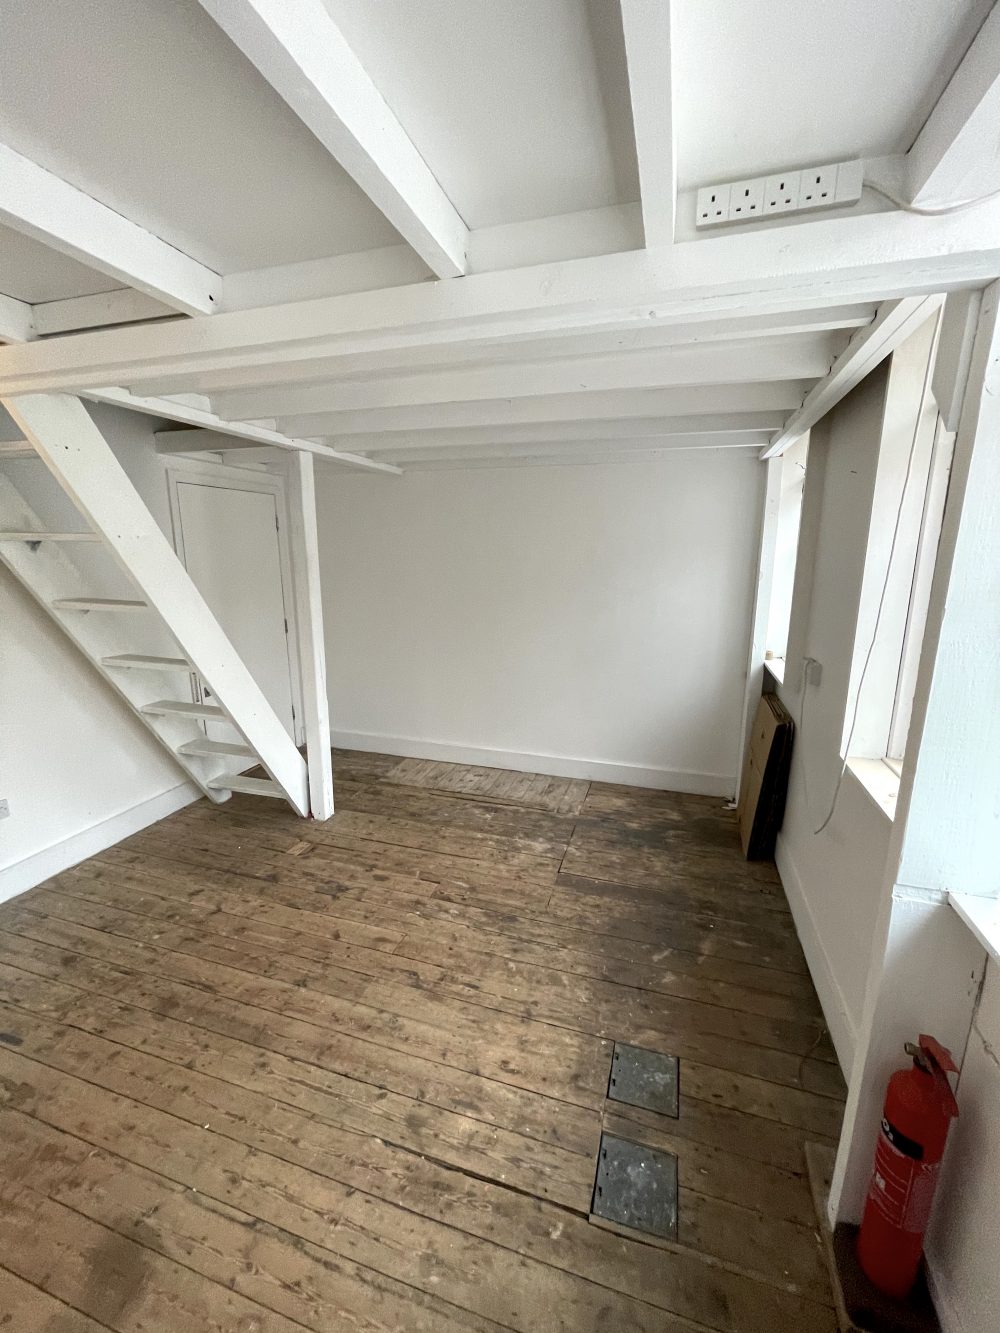 Mezzanine Studio Available to rent in N16 Shelford Place Pic6